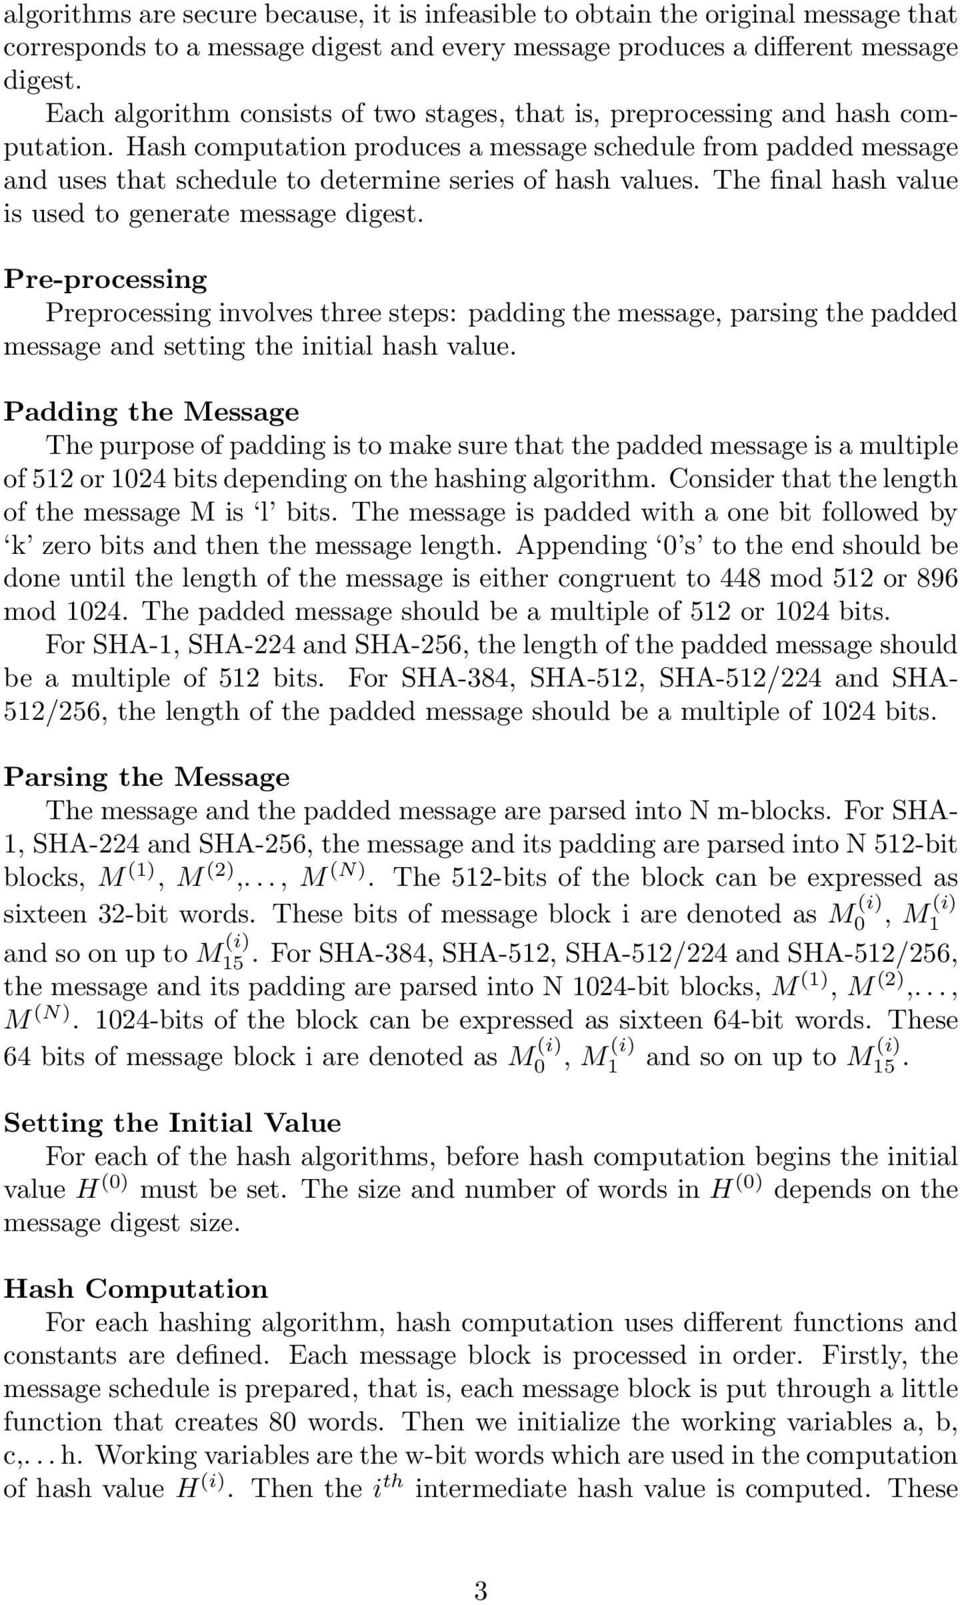 Hash computation produces a message schedule from padded message and uses that schedule to determine series of hash values. The final hash value is used to generate message digest.